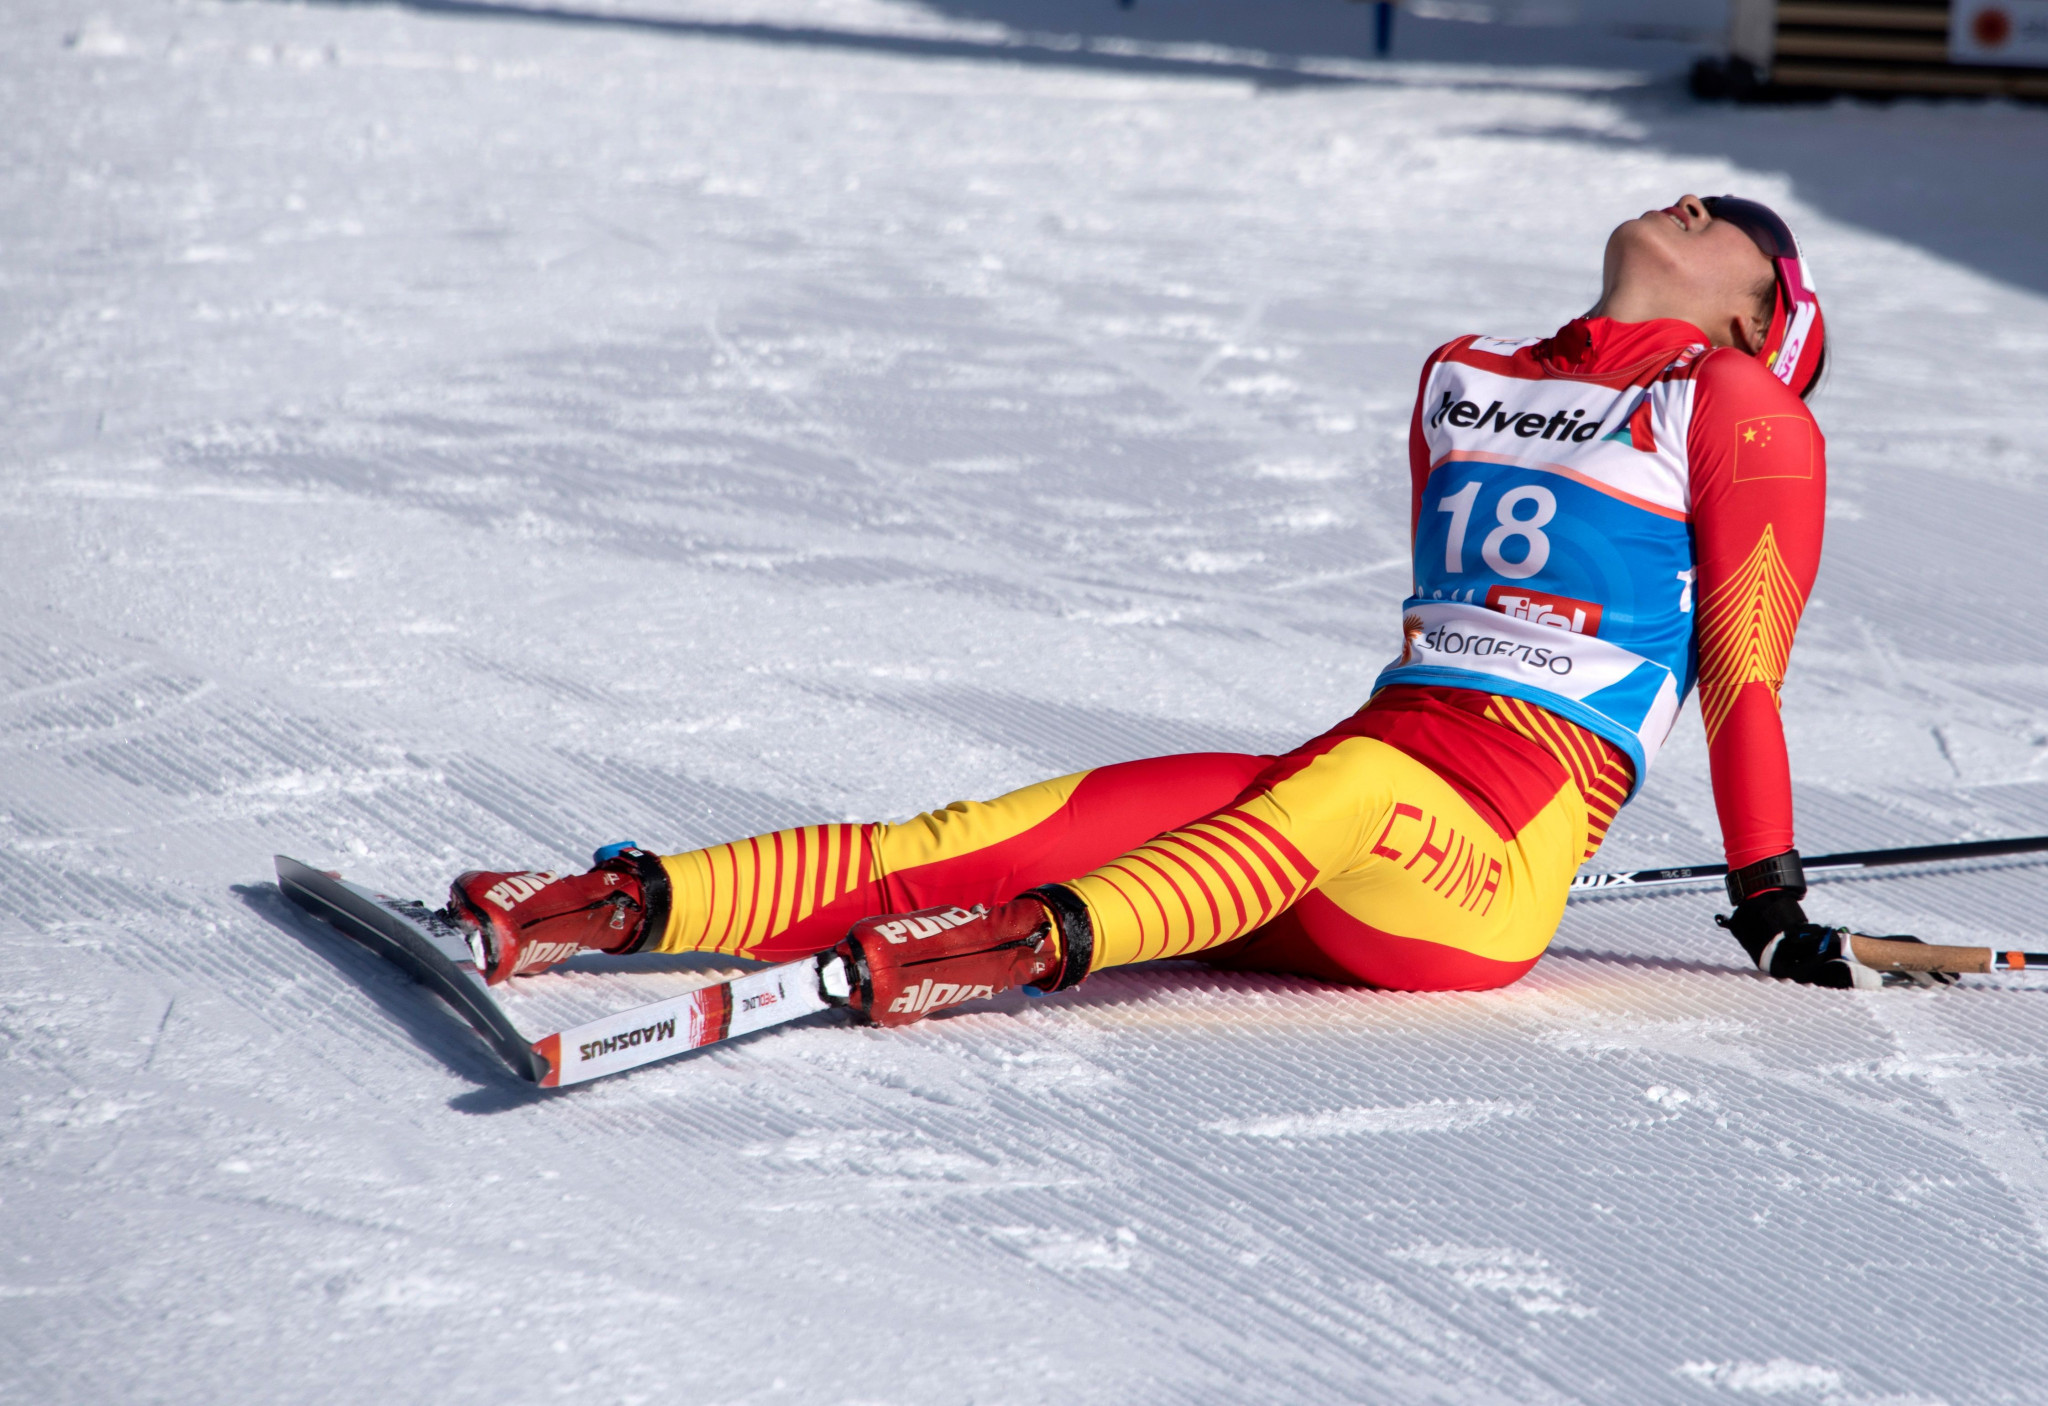 Afterwards in the finish area, she appeared exhausted ©Getty Images